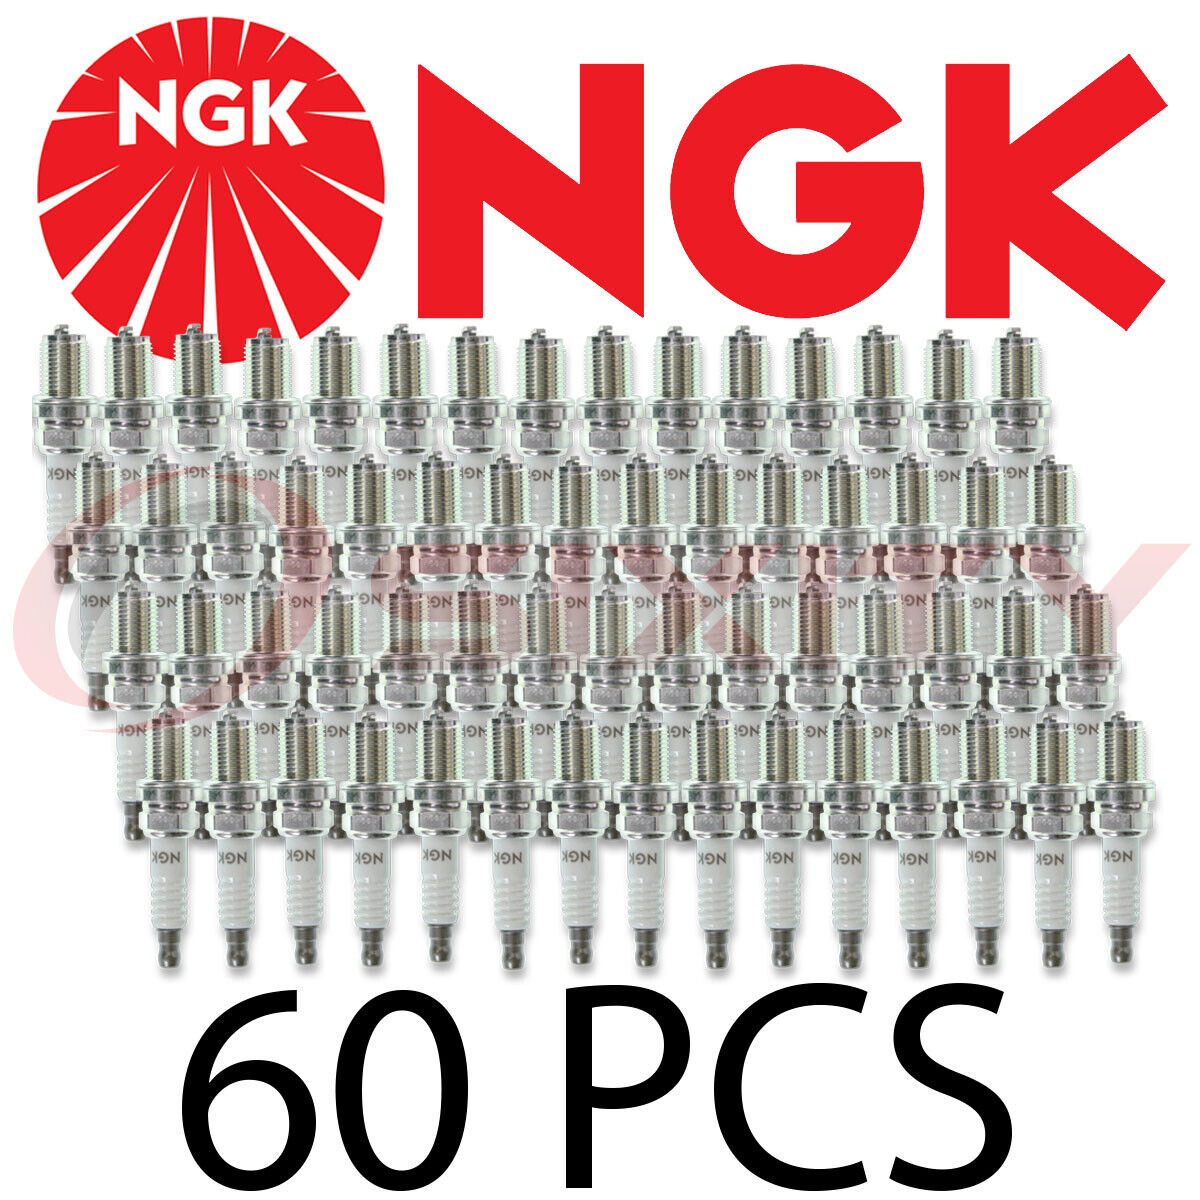 NGK R5671A-10 5820 Racing Spark Plugs 60 Case V Power Nitrous Turbo Supercharged